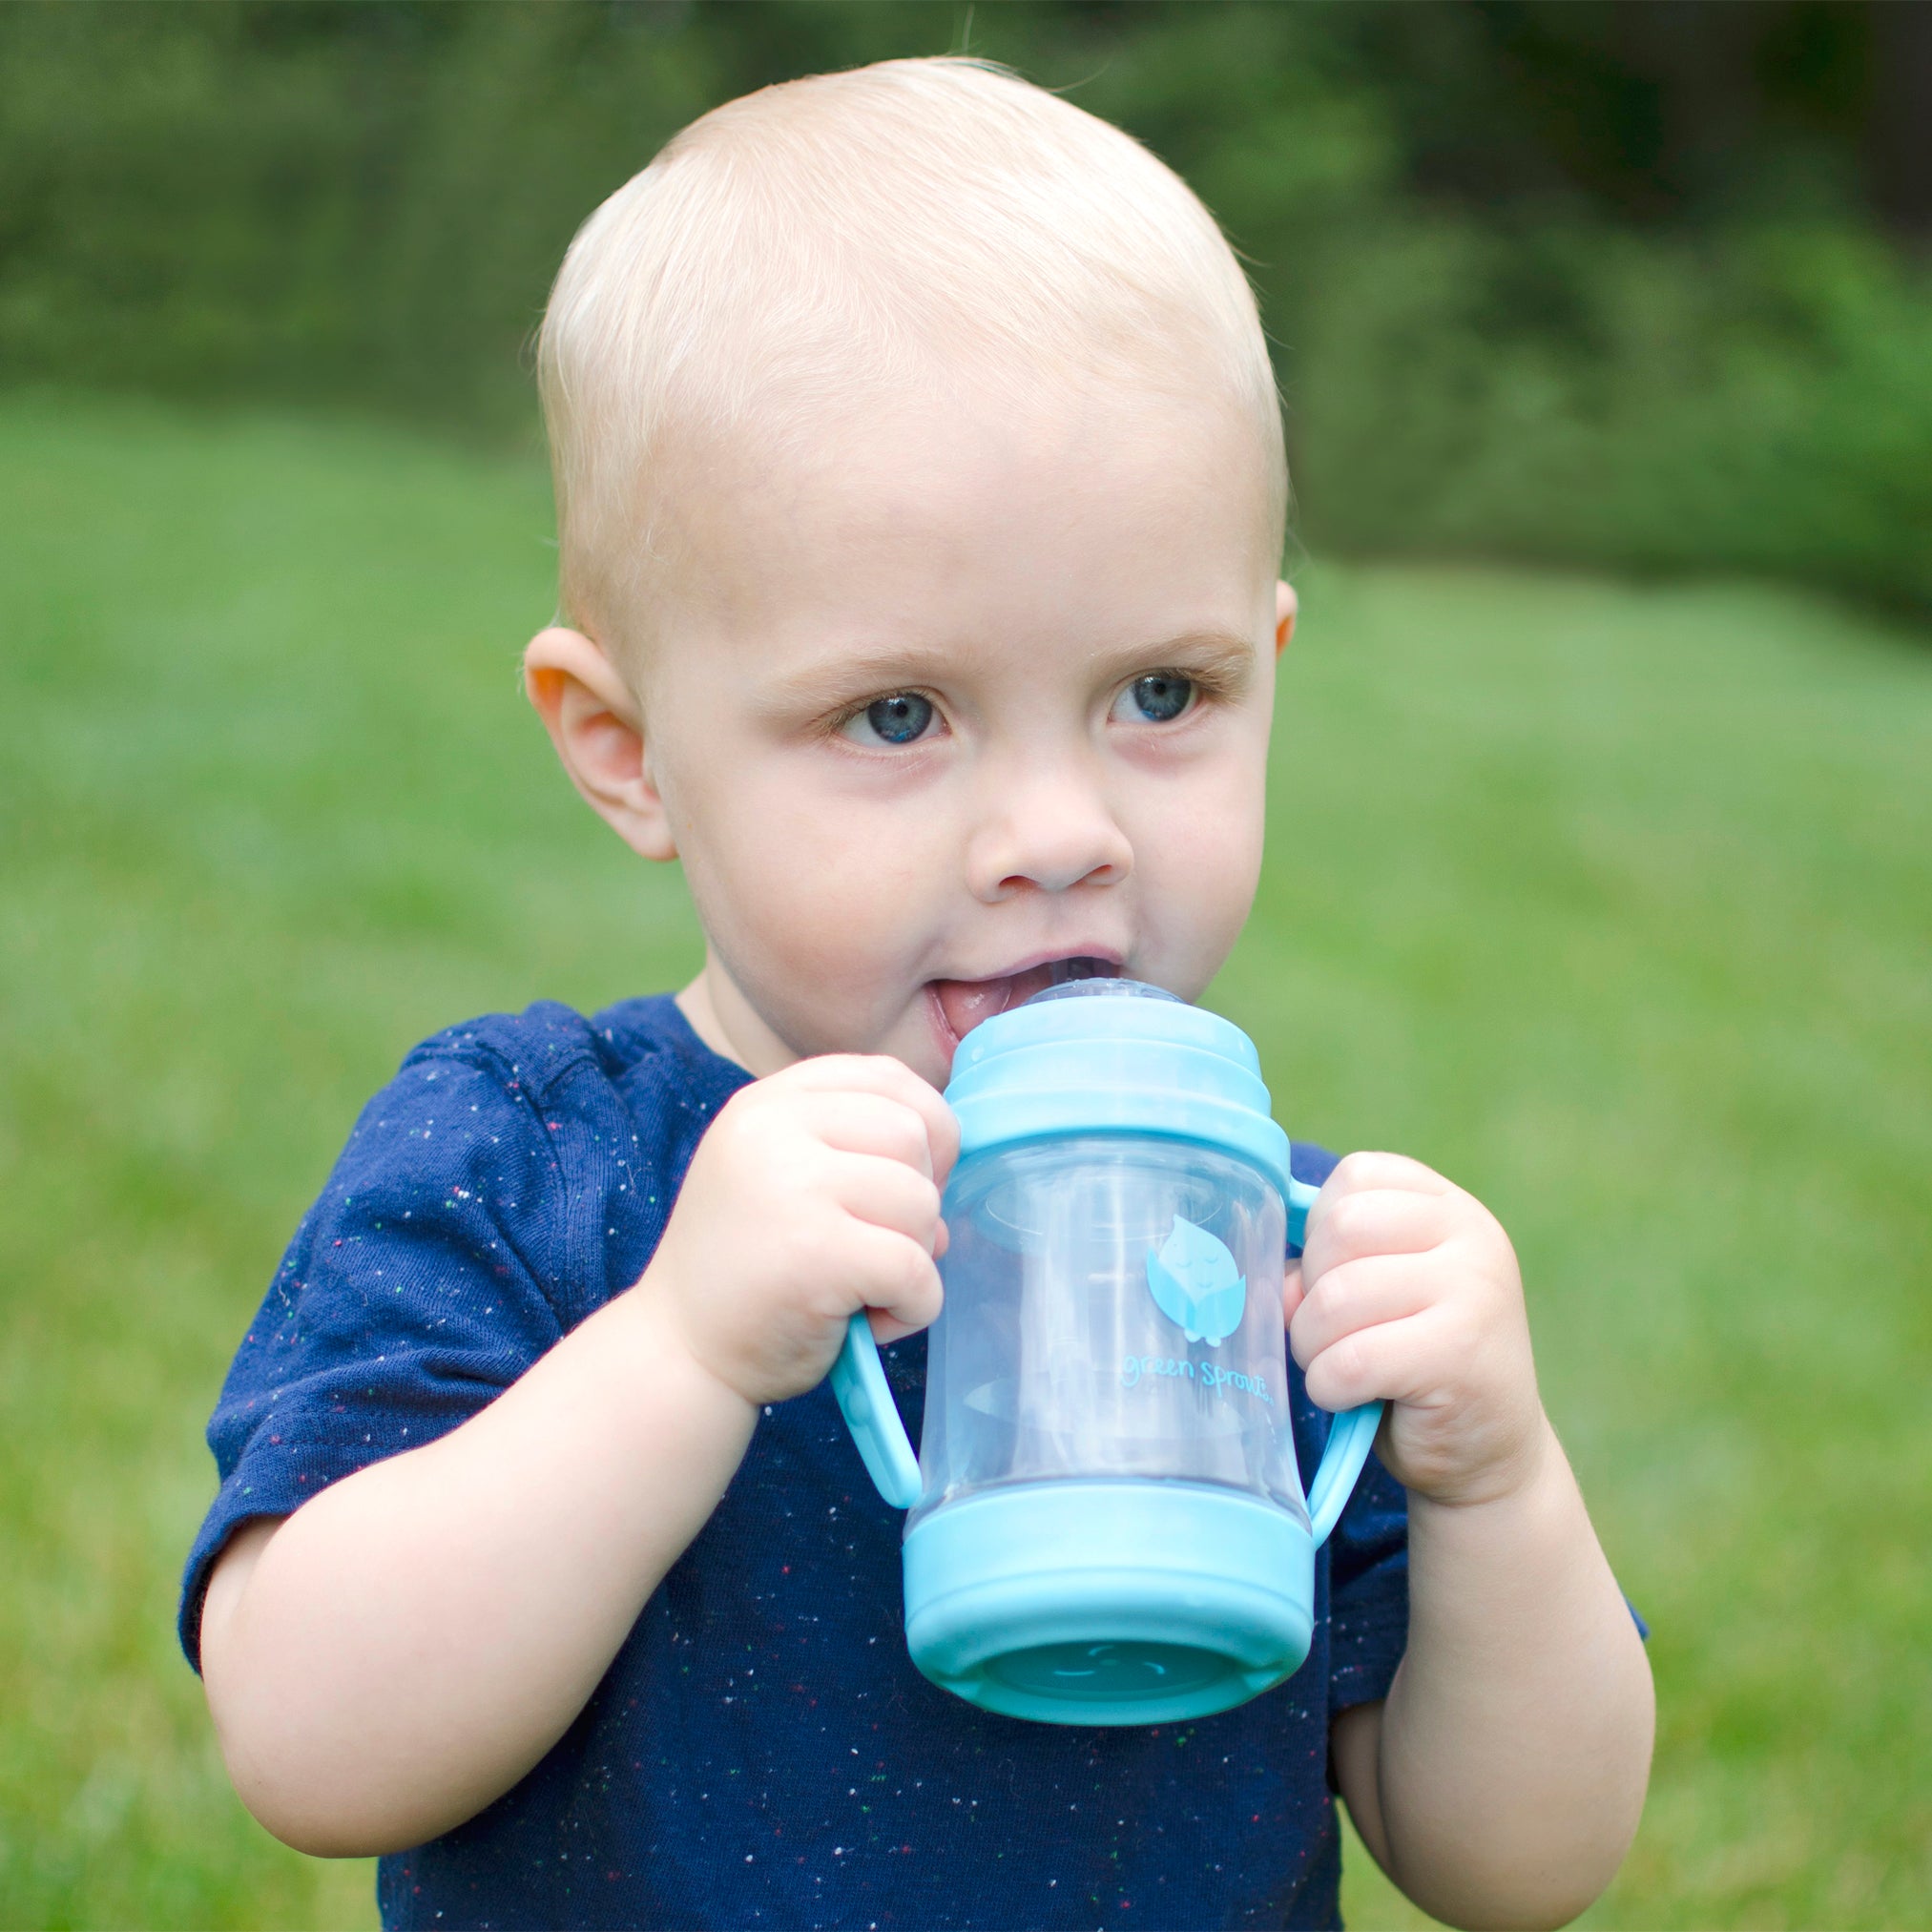 A toddler boy with a blue shirt holding a blue cup that the Glass Insert for Sip and Straw Cup.